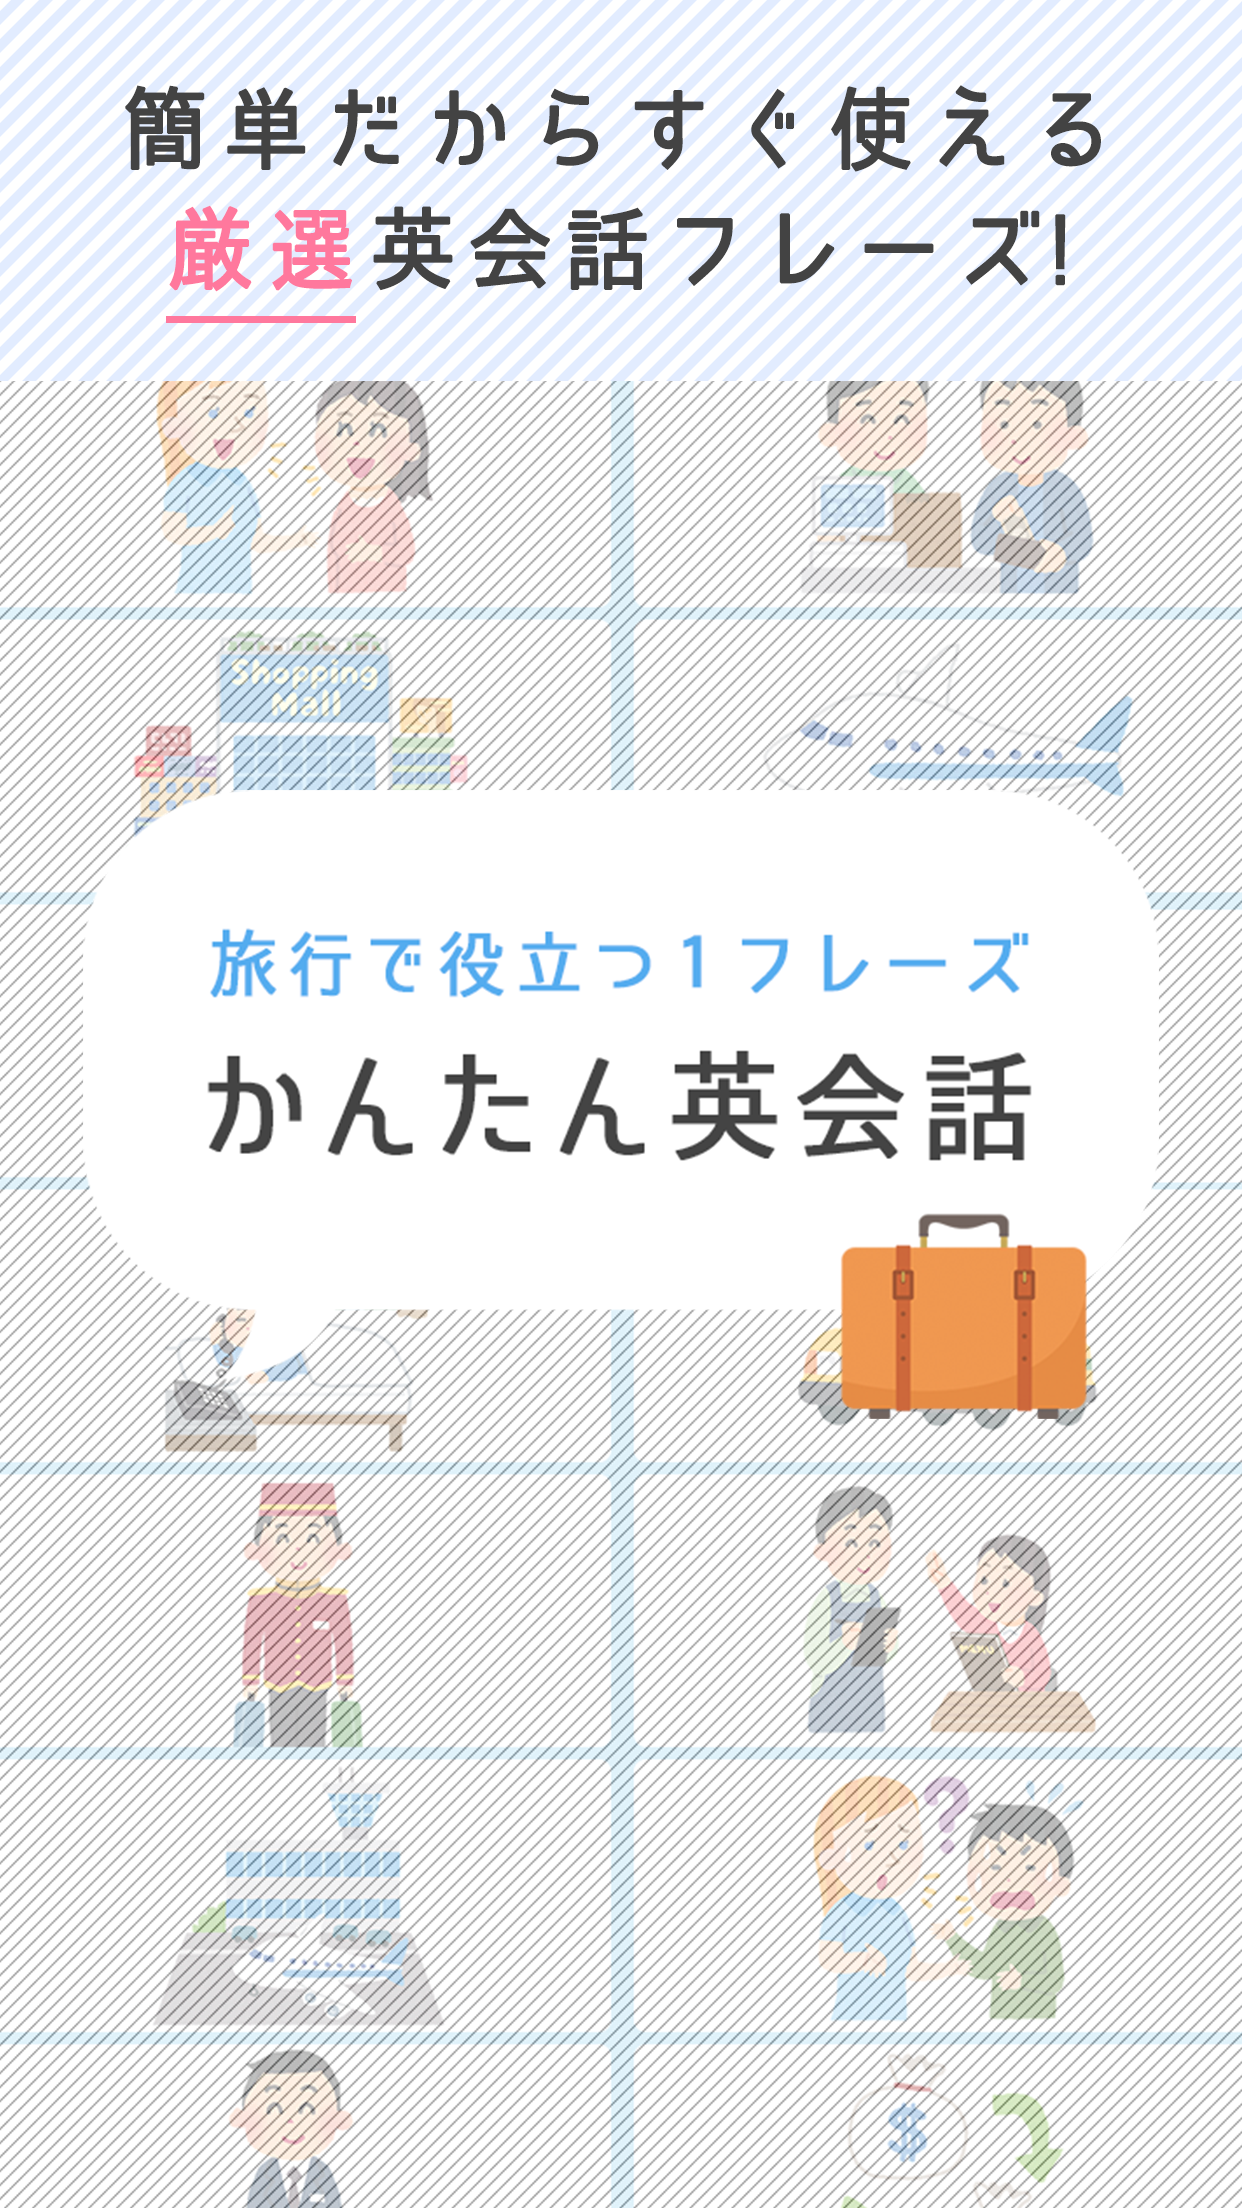 Screenshot 1 of Easy English Conversation -Free Easy English Quizzes Useful for Traveling Abroad- 1.1.3